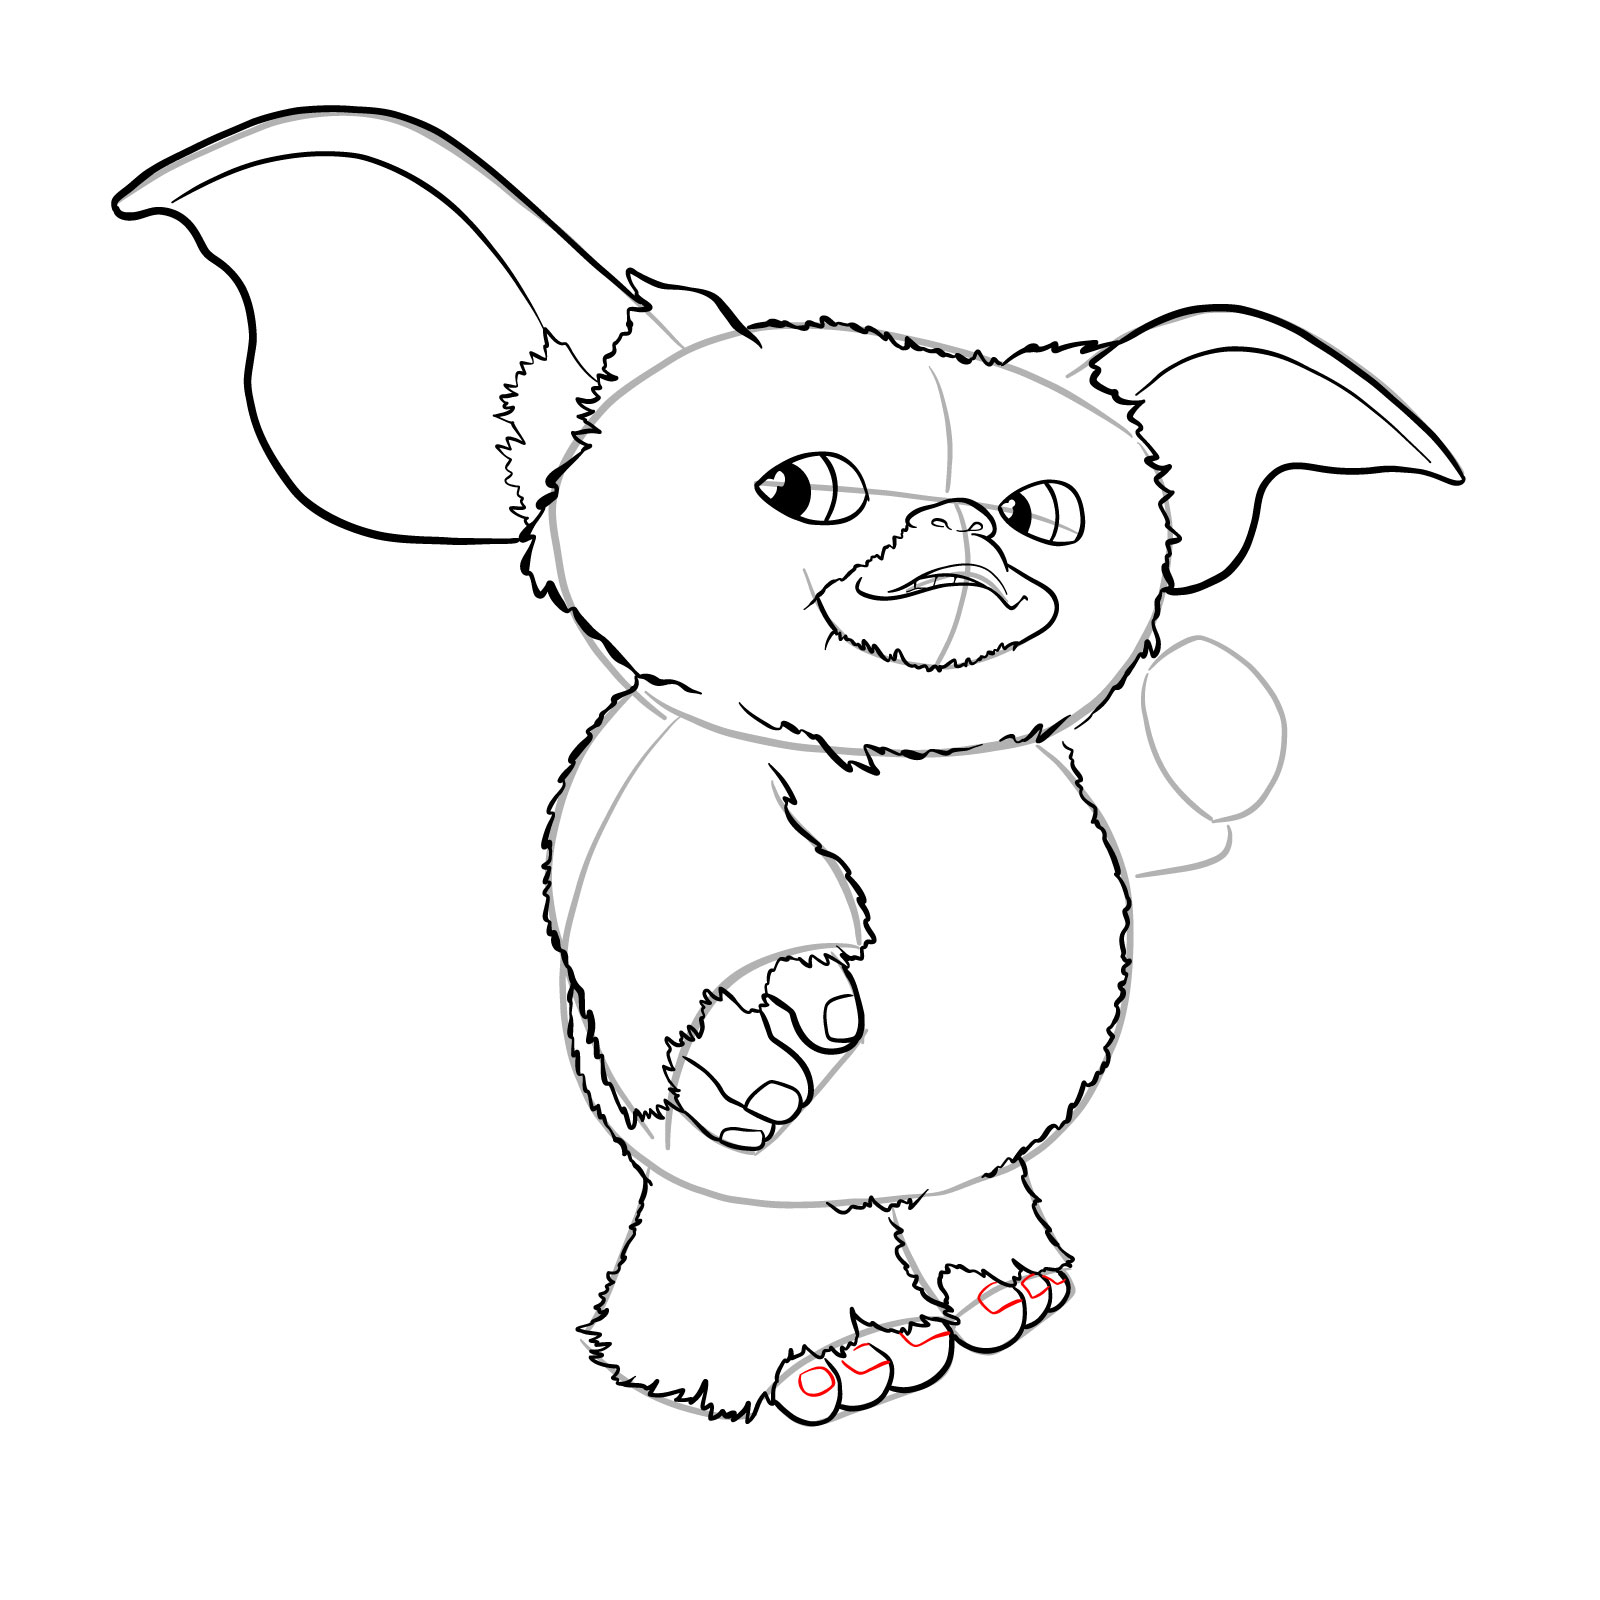 How to draw a Gremlin - step 25